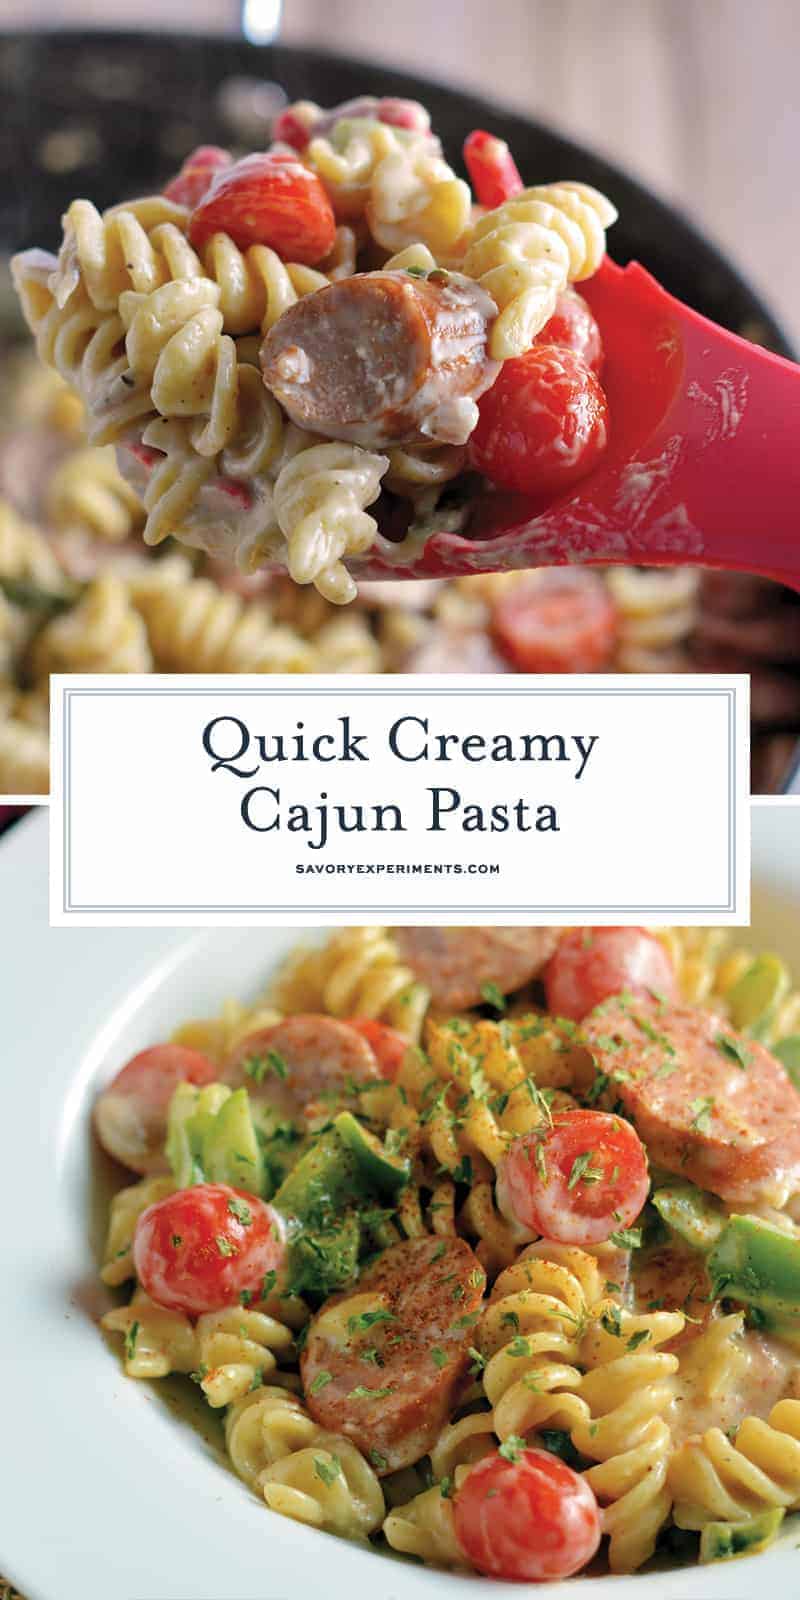 Creamy Cajun Pasta is rotini in a cream sauce with cajun seasoning, smoky andouille sausage, sautéed peppers, red onion and grape tomatoes. Takes 20 minutes to make! #cajunpasta #easypastadishes www.savoryexperiments.com 